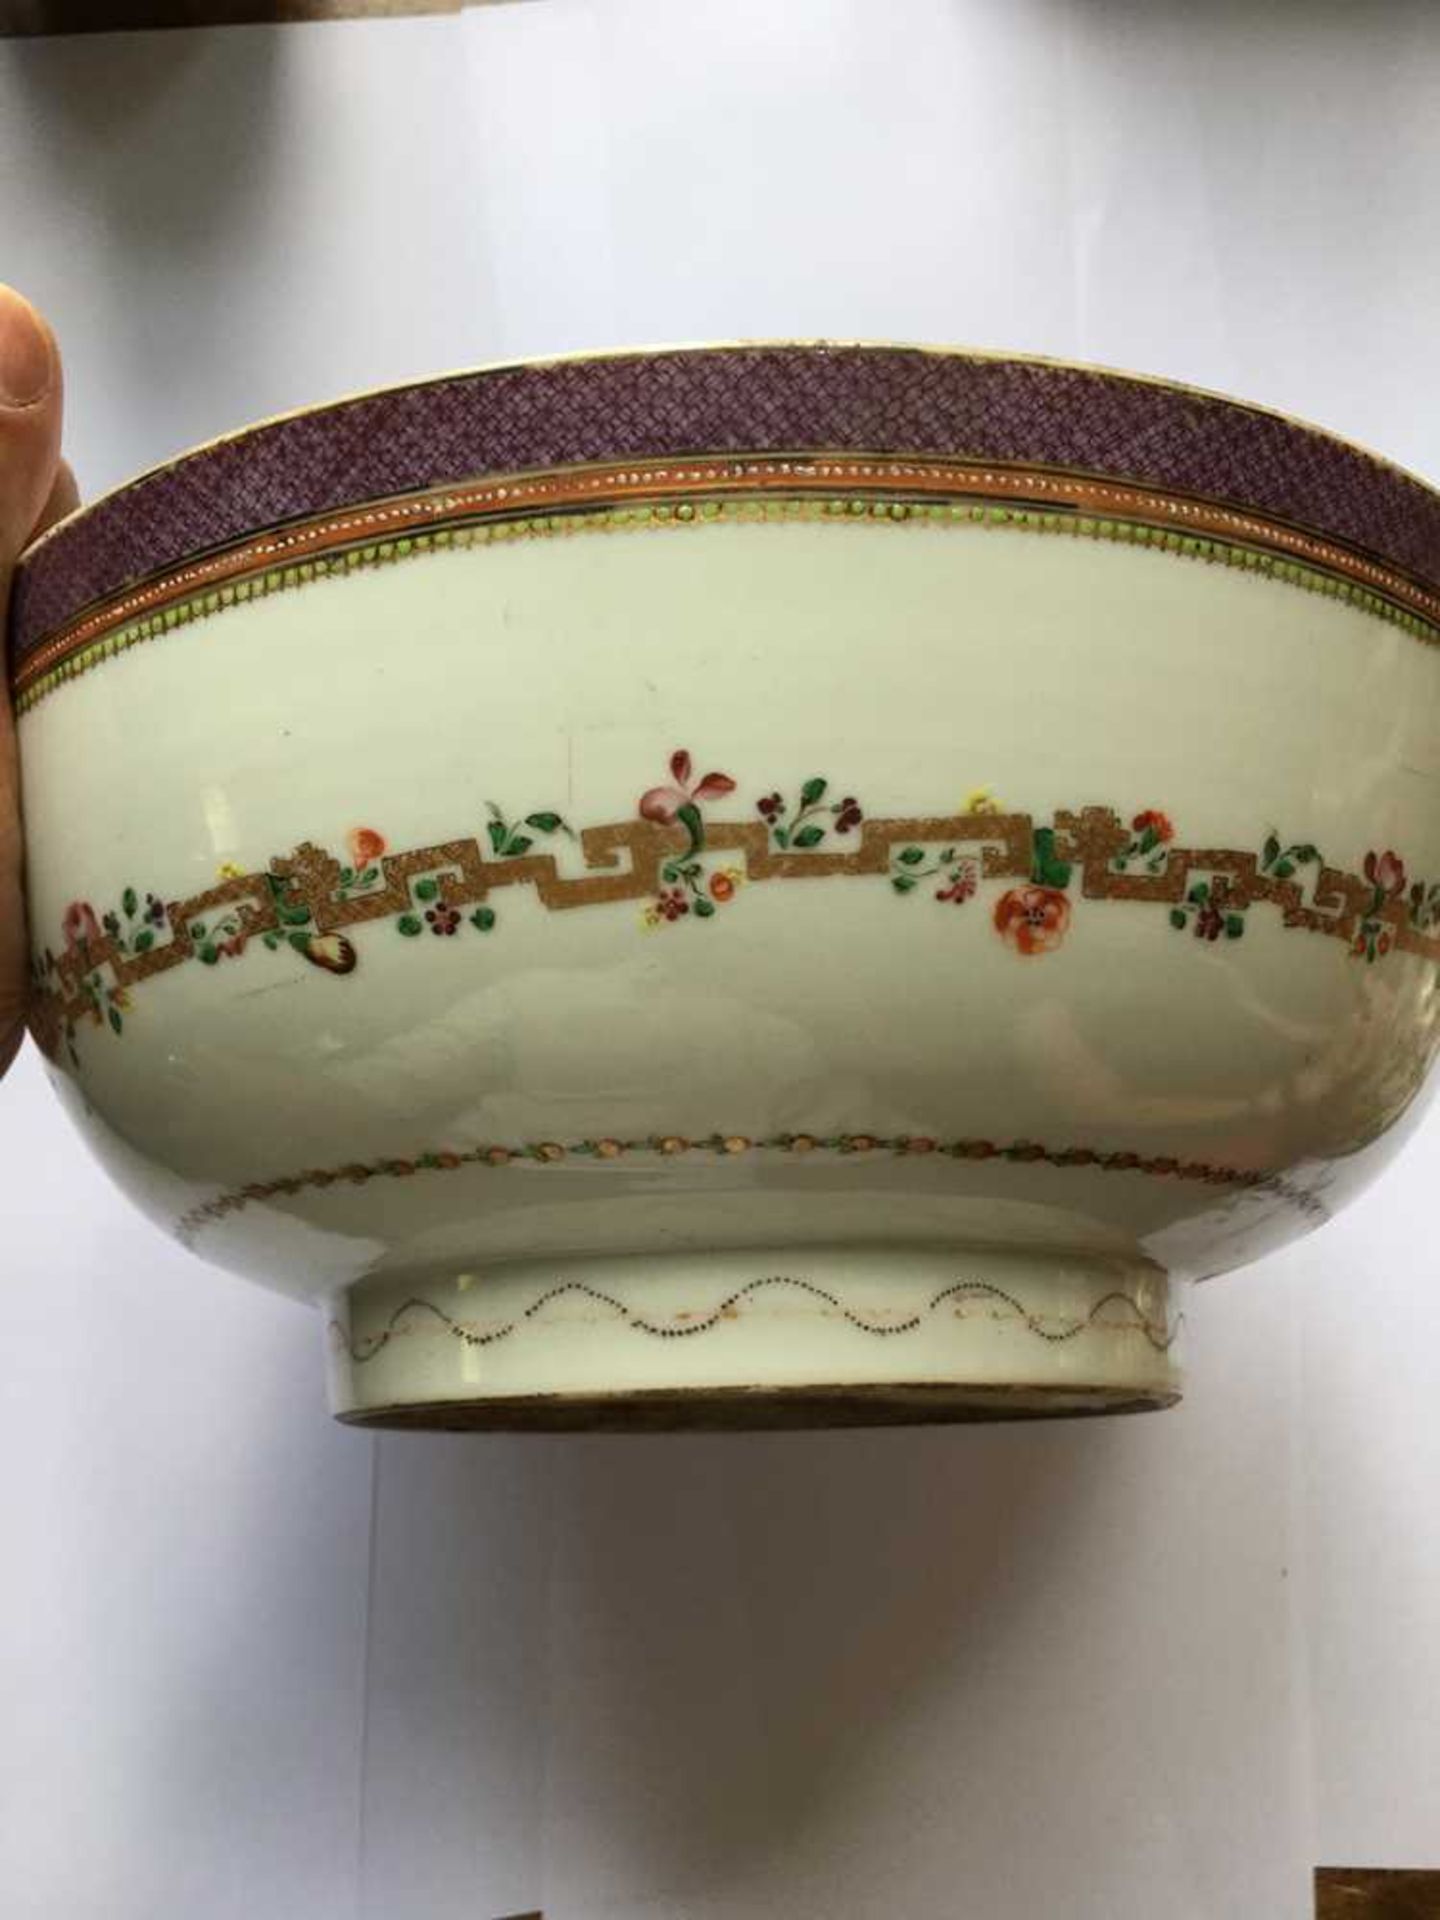 TWO CHINESE EXPORT PORCELAIN PUNCH BOWLS QING DYNASTY, LATE 18TH/19TH CENTURY - Image 7 of 33